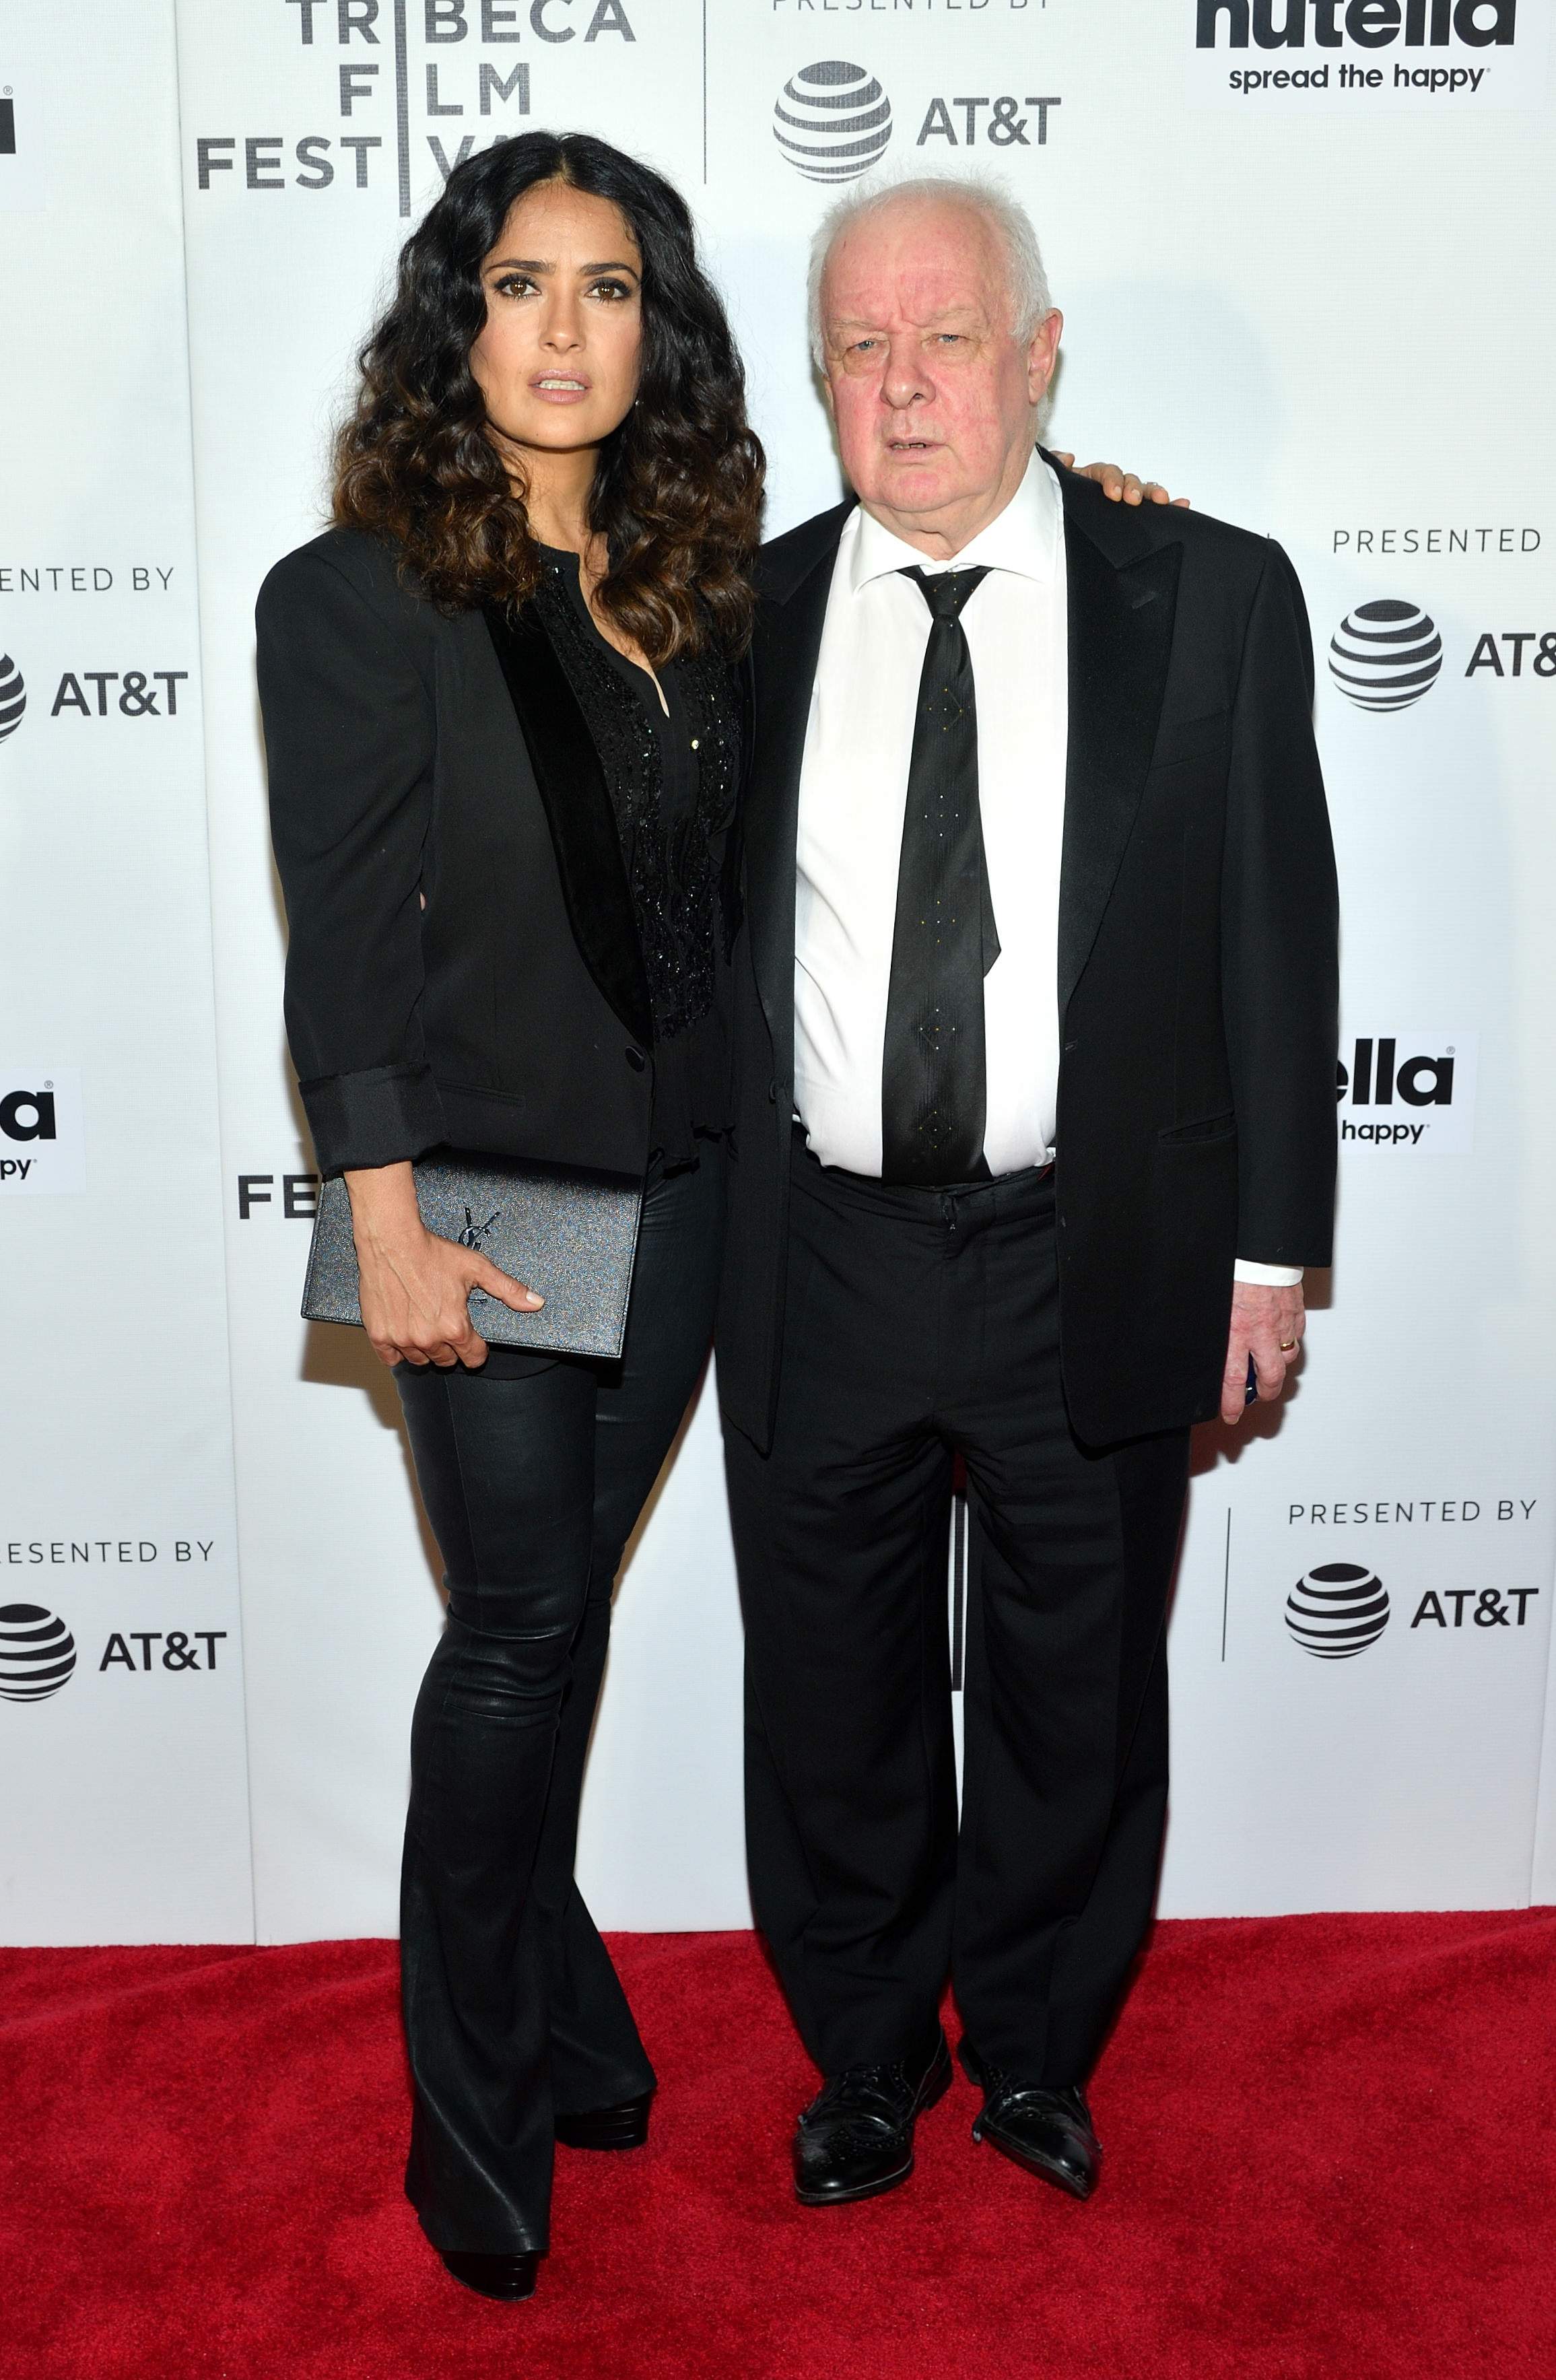 Salma Hayek attends Tribeca Shorts Group Therapy